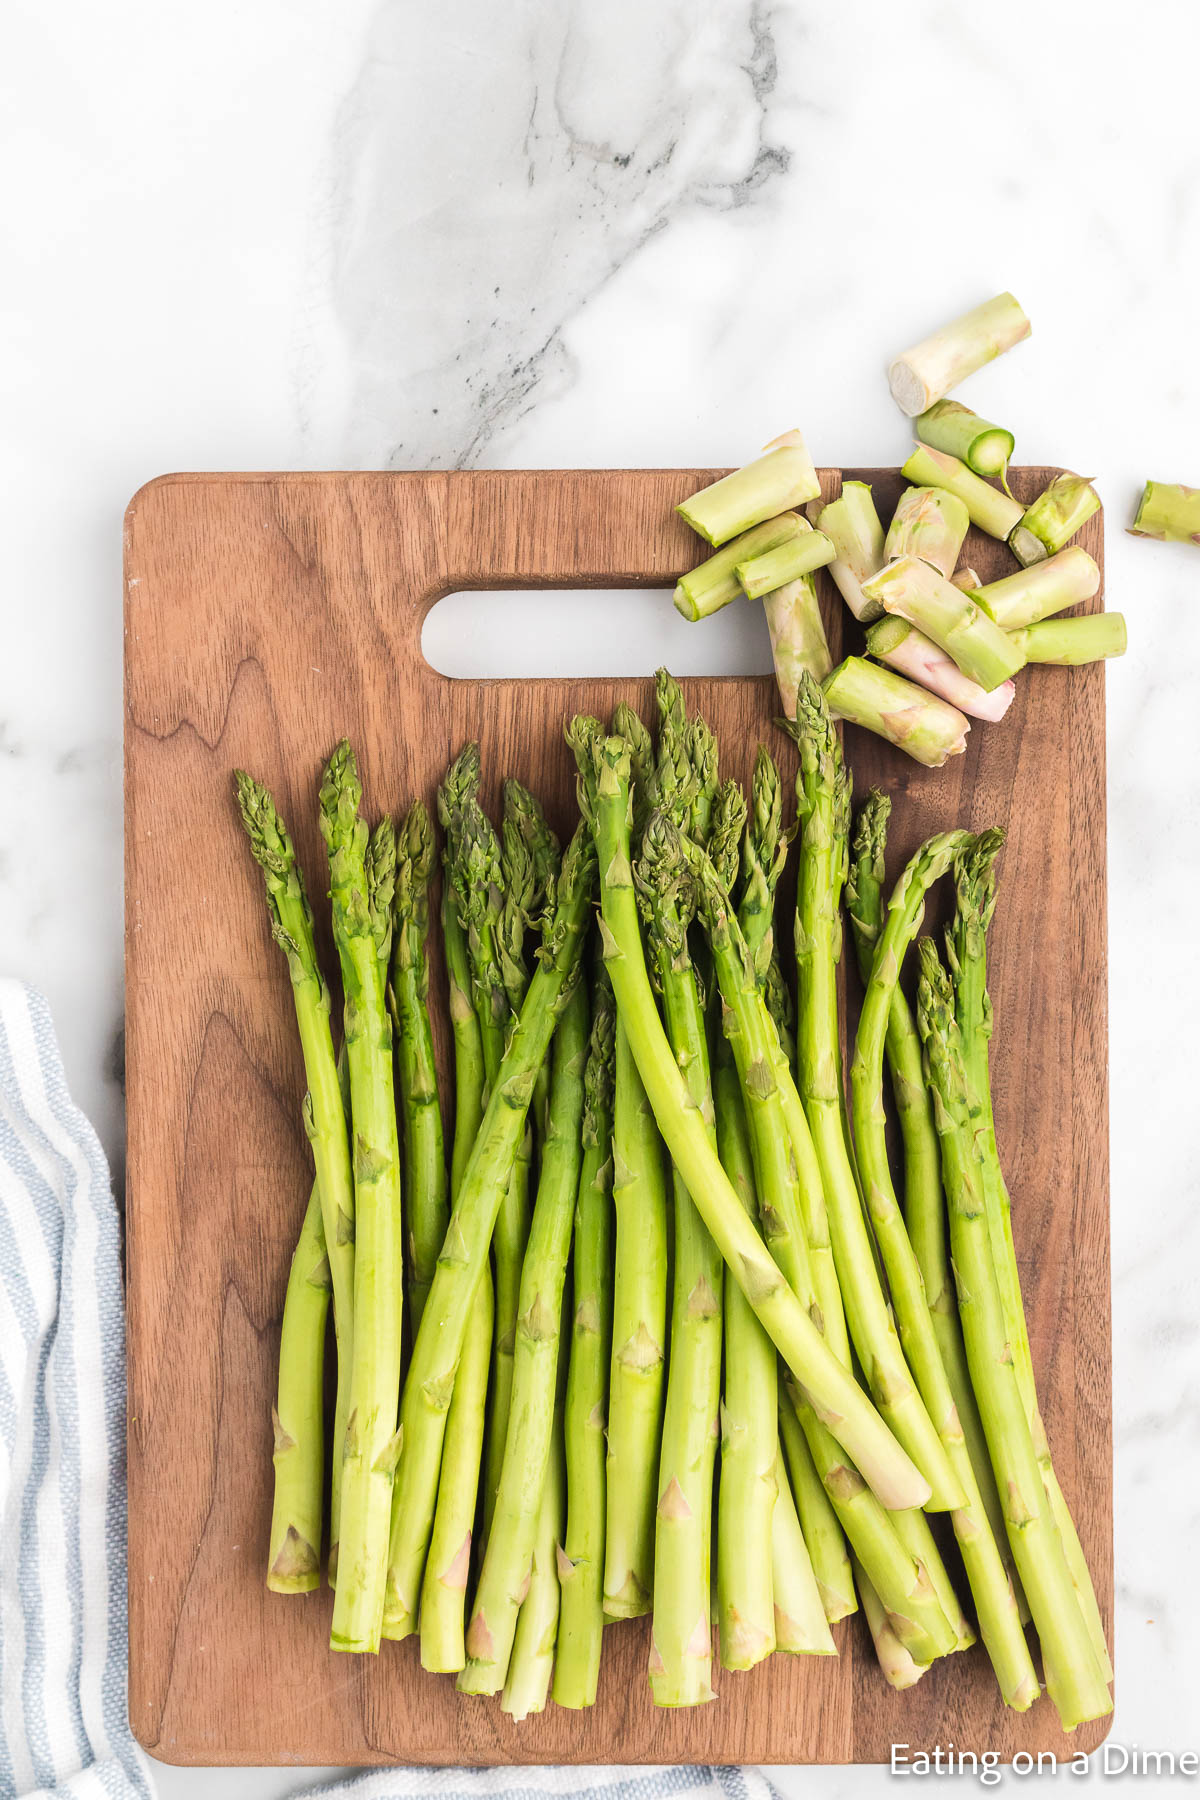 Trimming asparagus on a cutting board